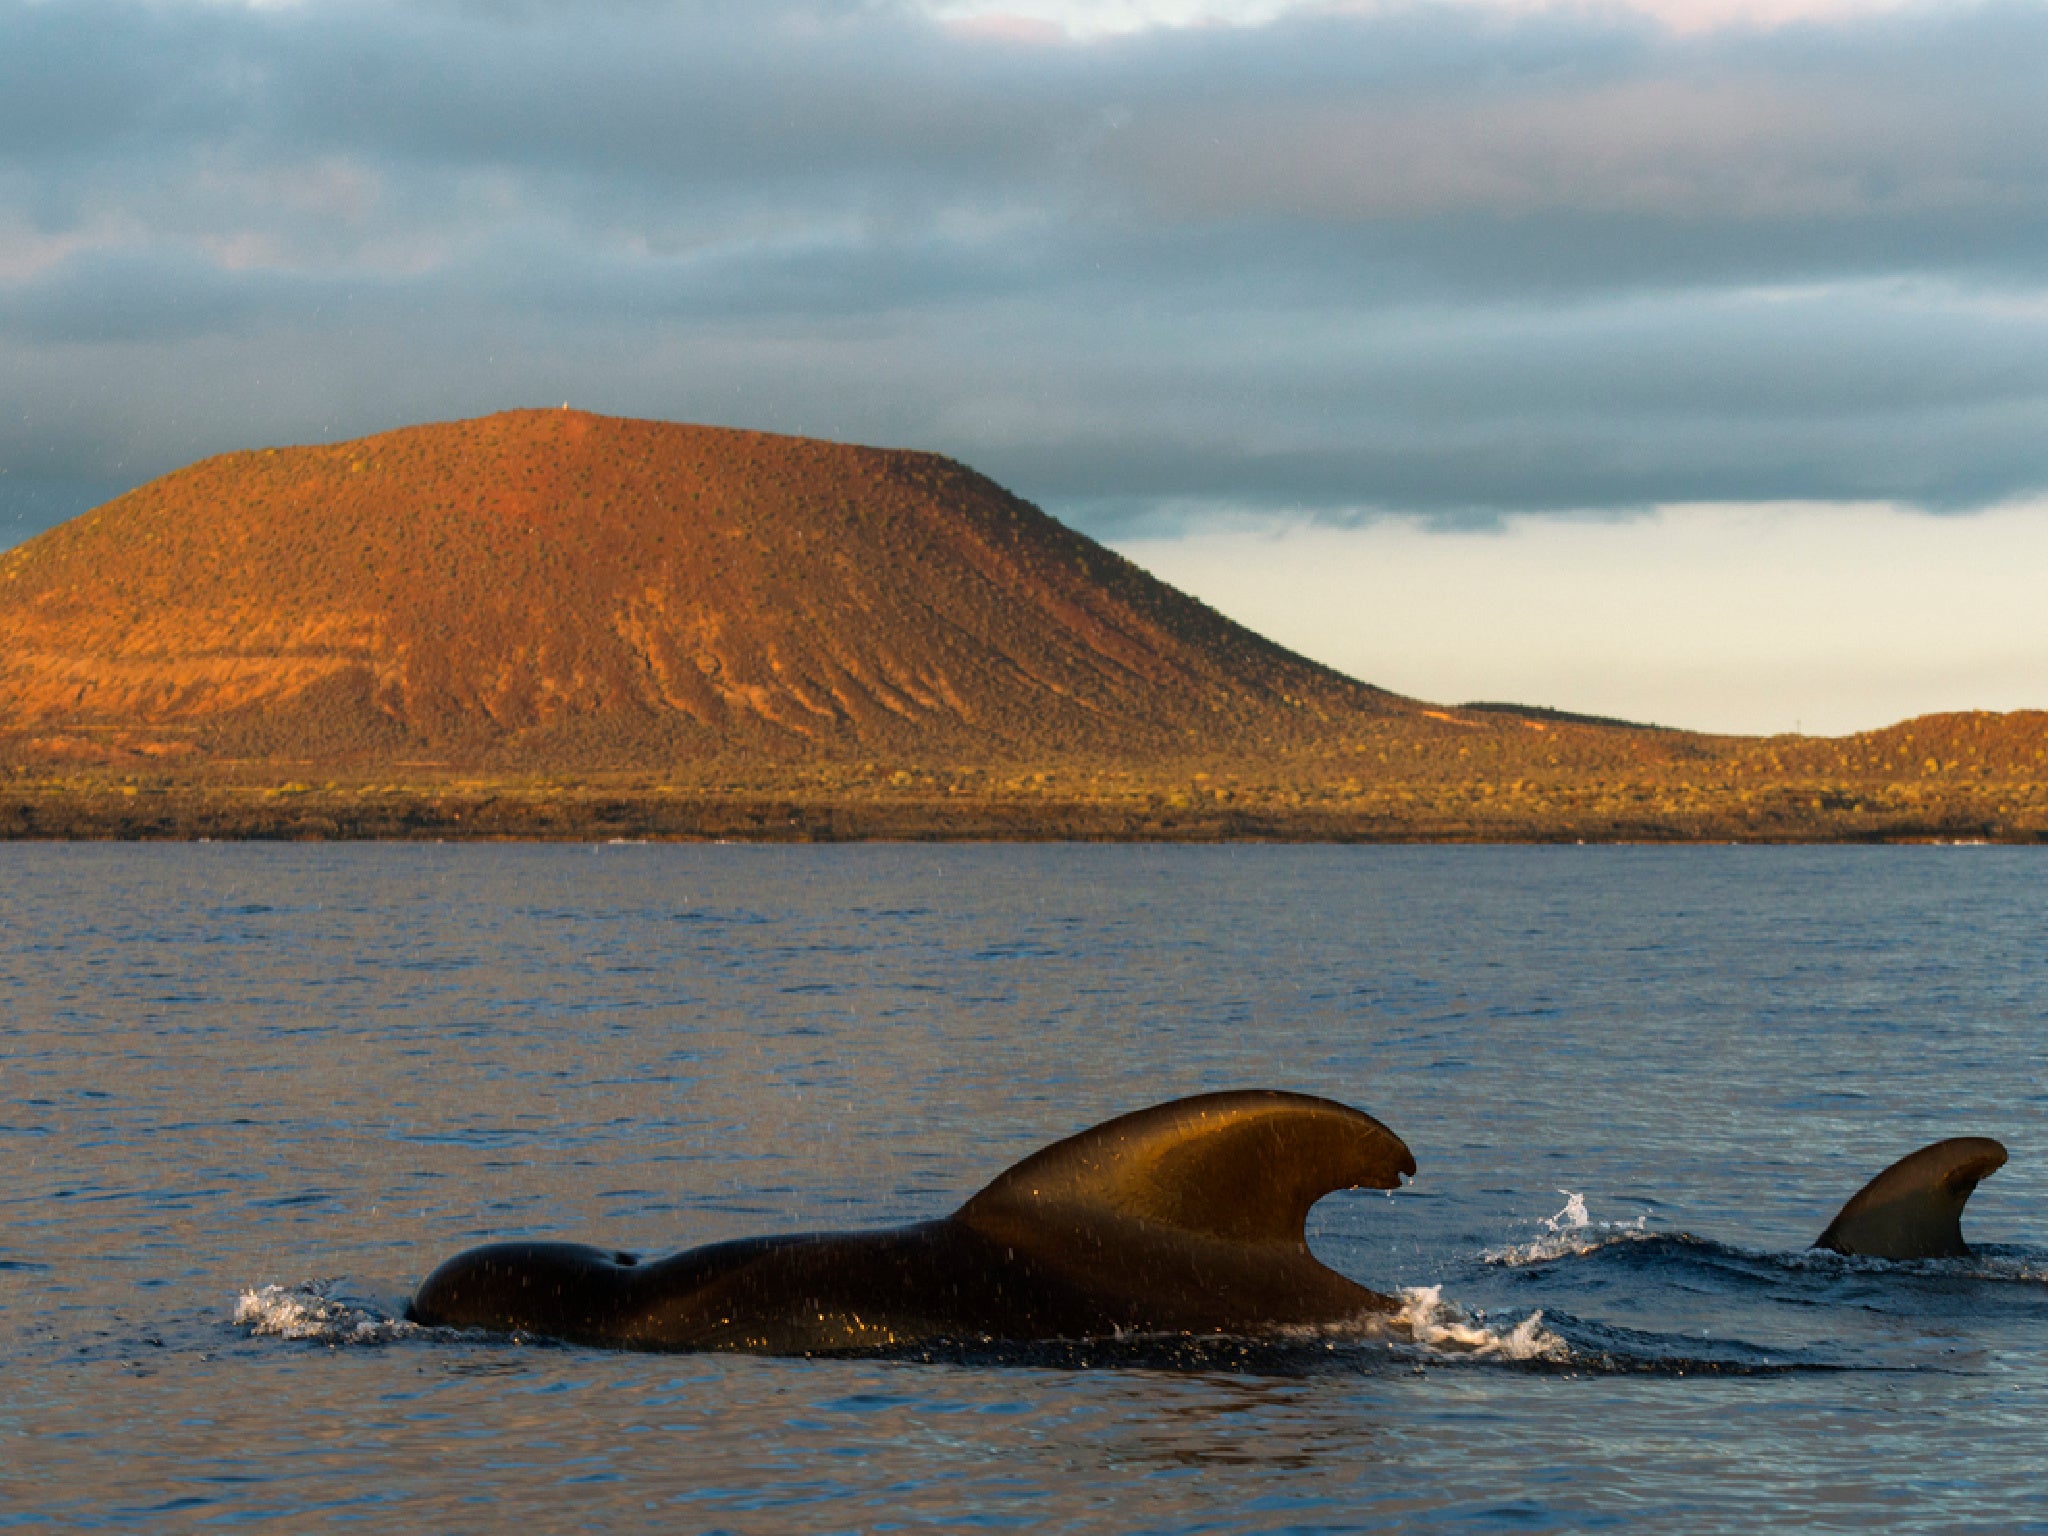 Pilot whales can be spotted year-round in Tenerife